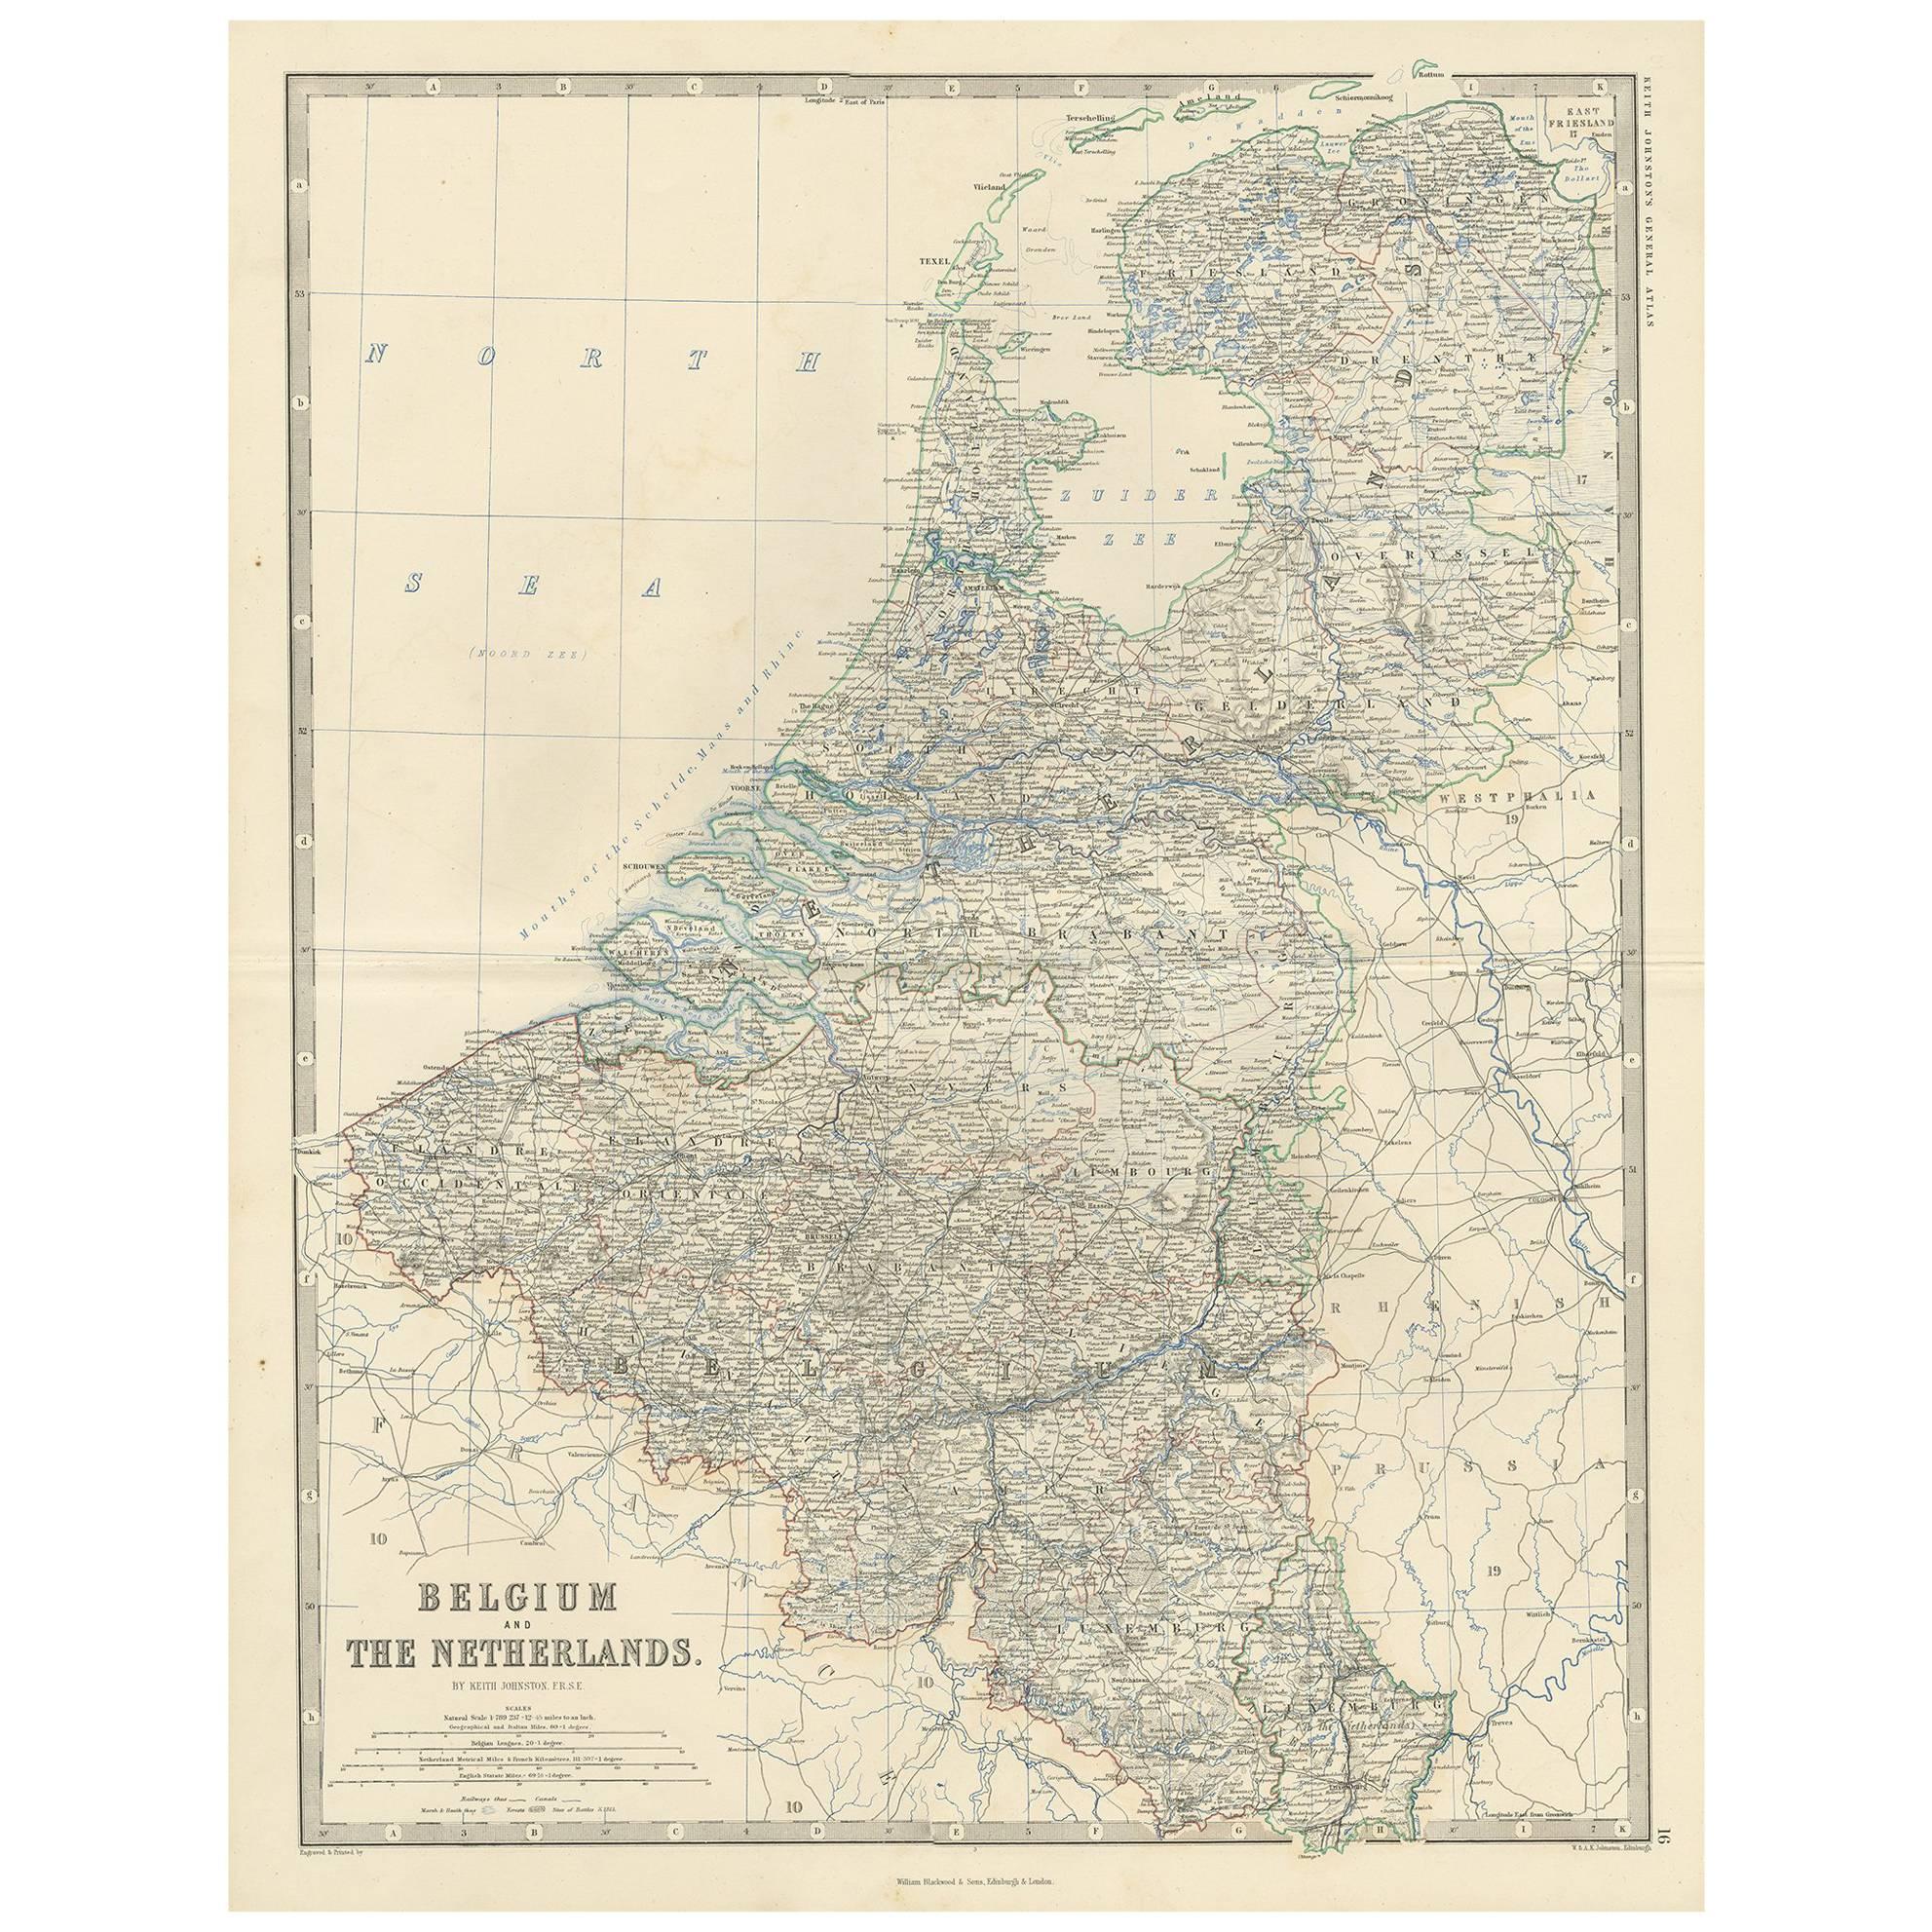 Antique Map of Belgium and The Netherlands by A.K. Johnston, 1865